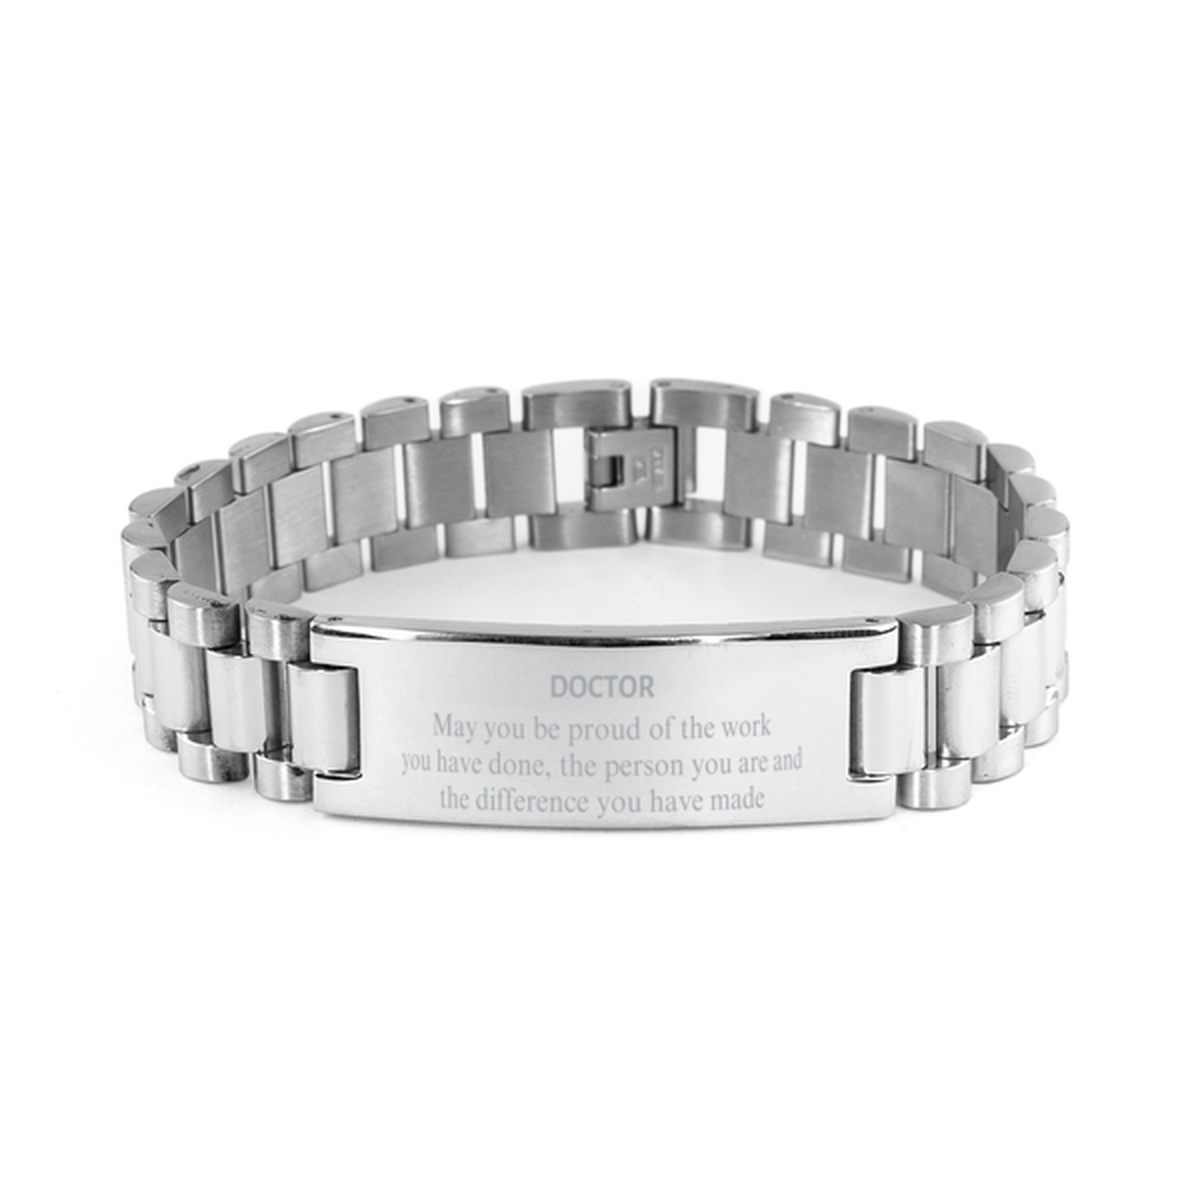 Doctor May you be proud of the work you have done, Retirement Doctor Ladder Stainless Steel Bracelet for Colleague Appreciation Gifts Amazing for Doctor